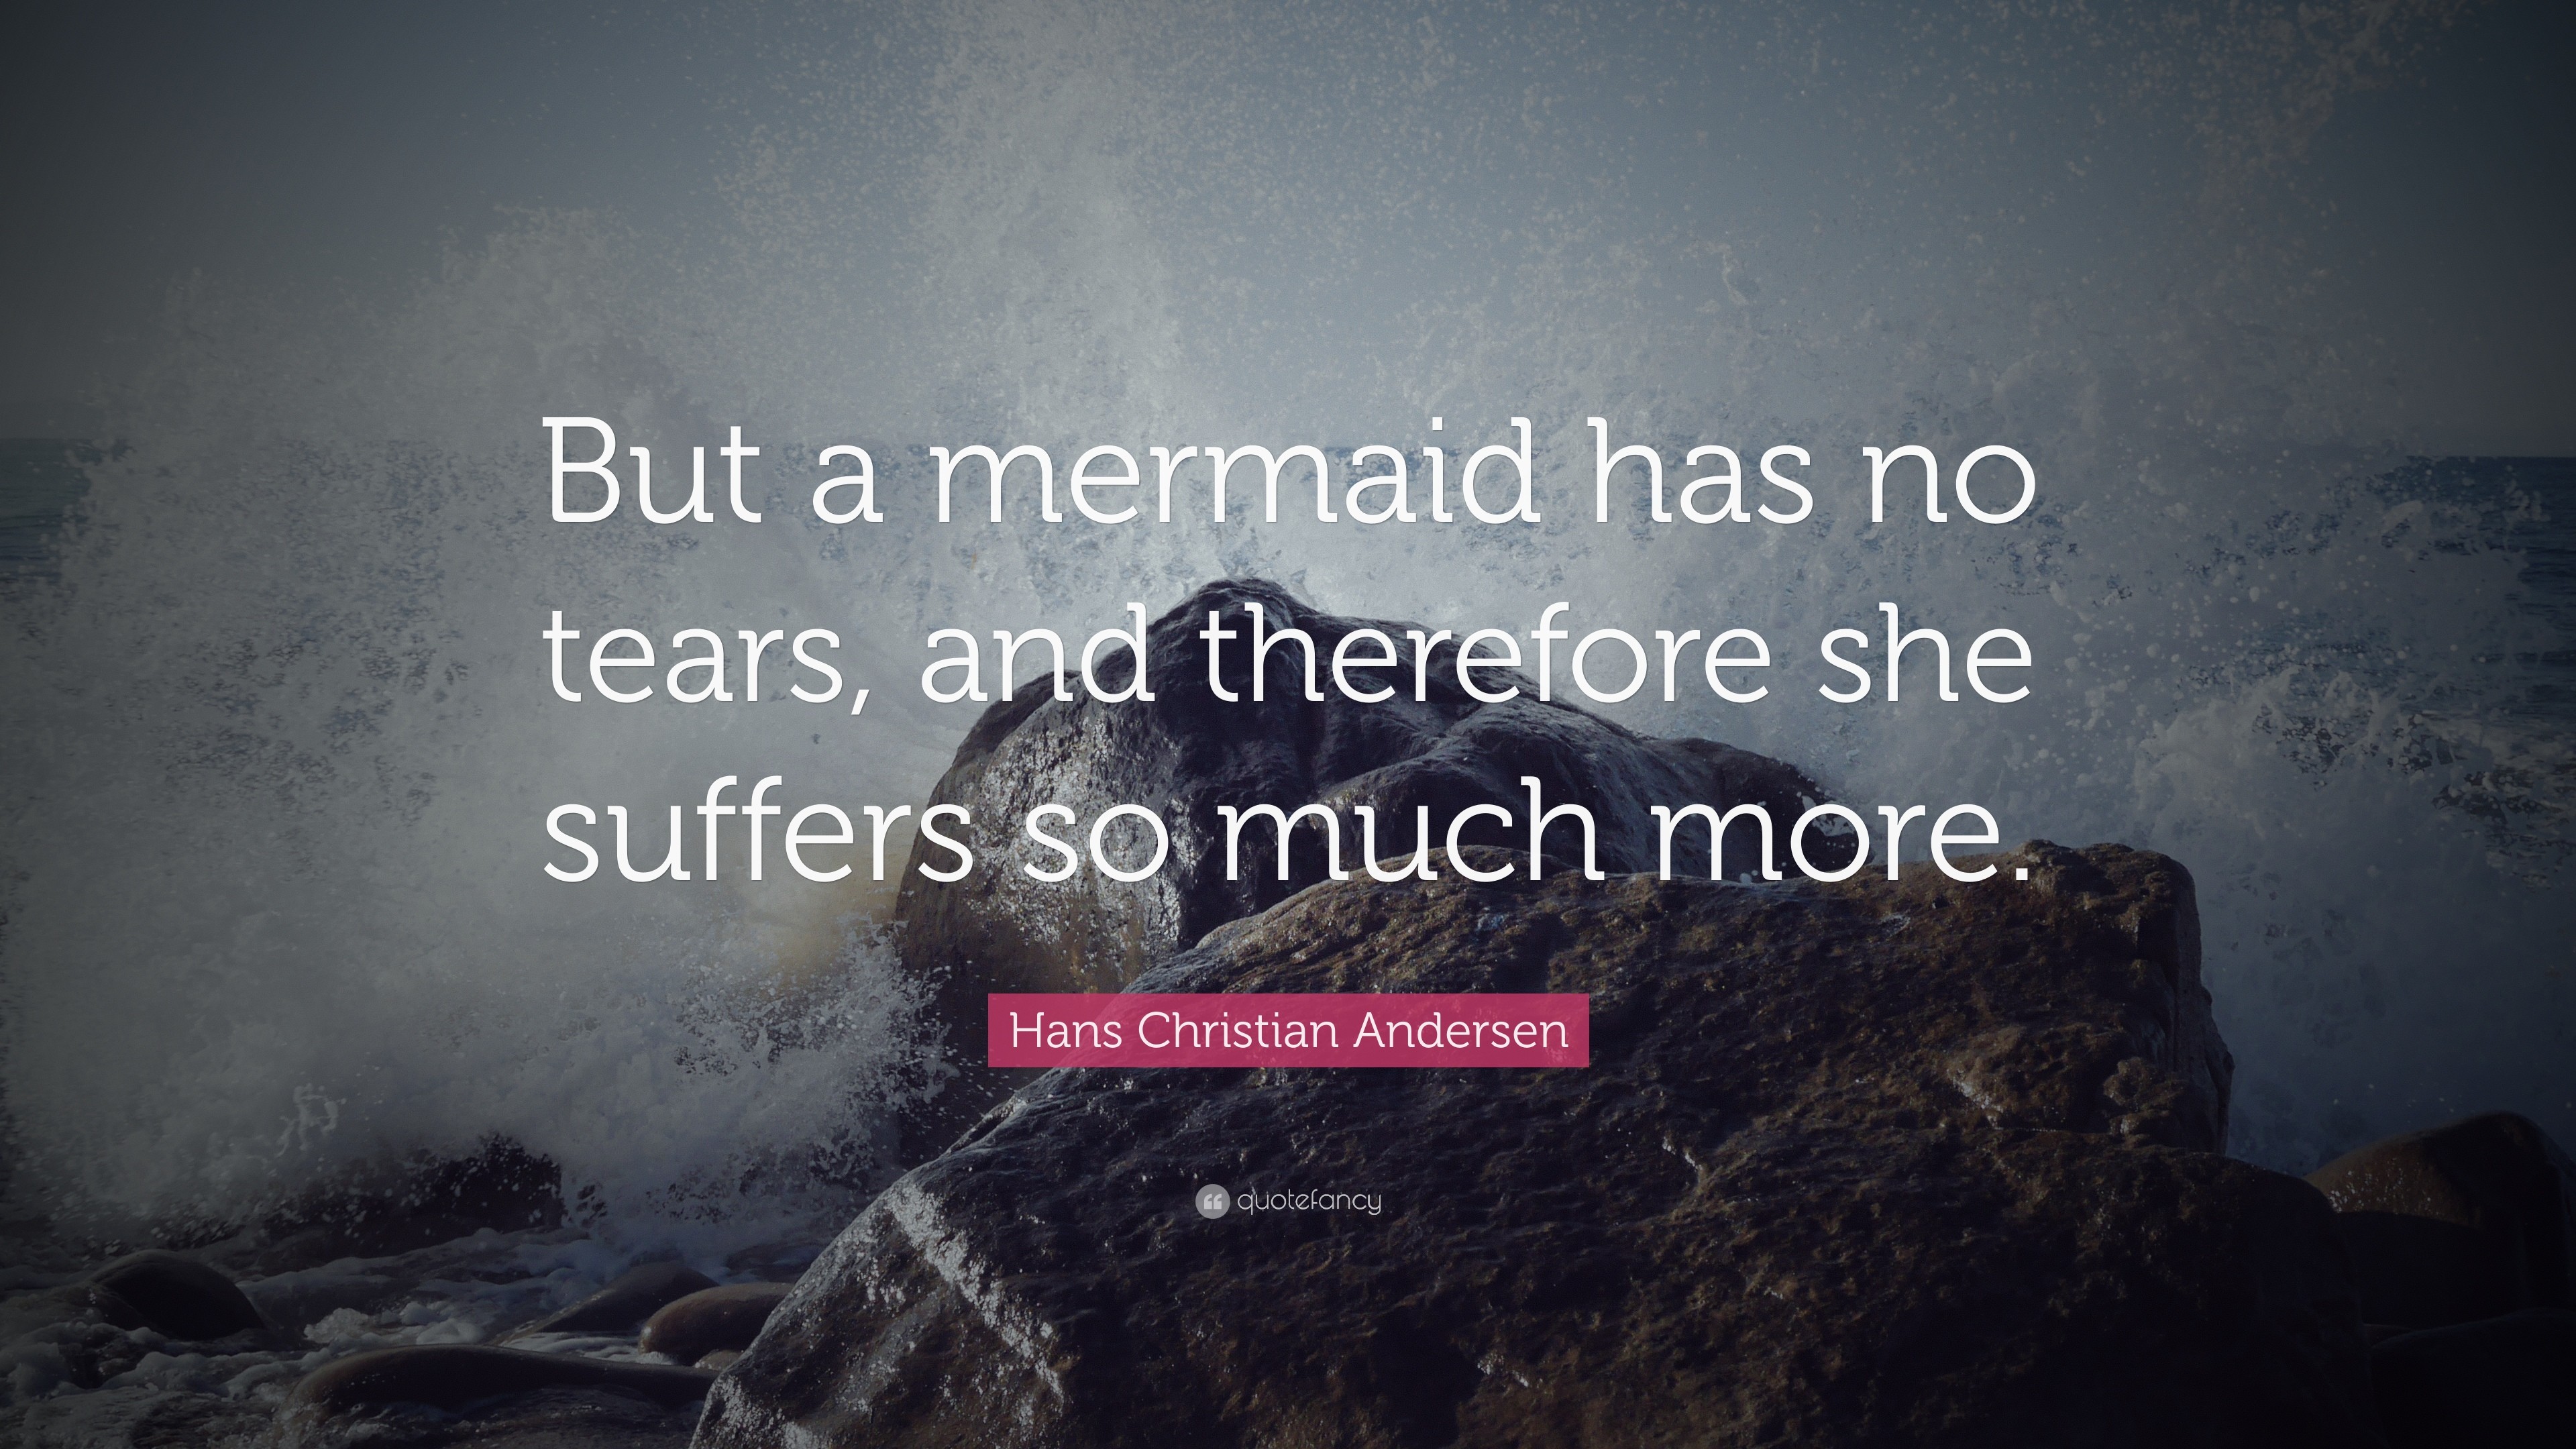 3840x2160 Hans Christian Andersen Quote: “But a mermaid has no tears, and therefore  she